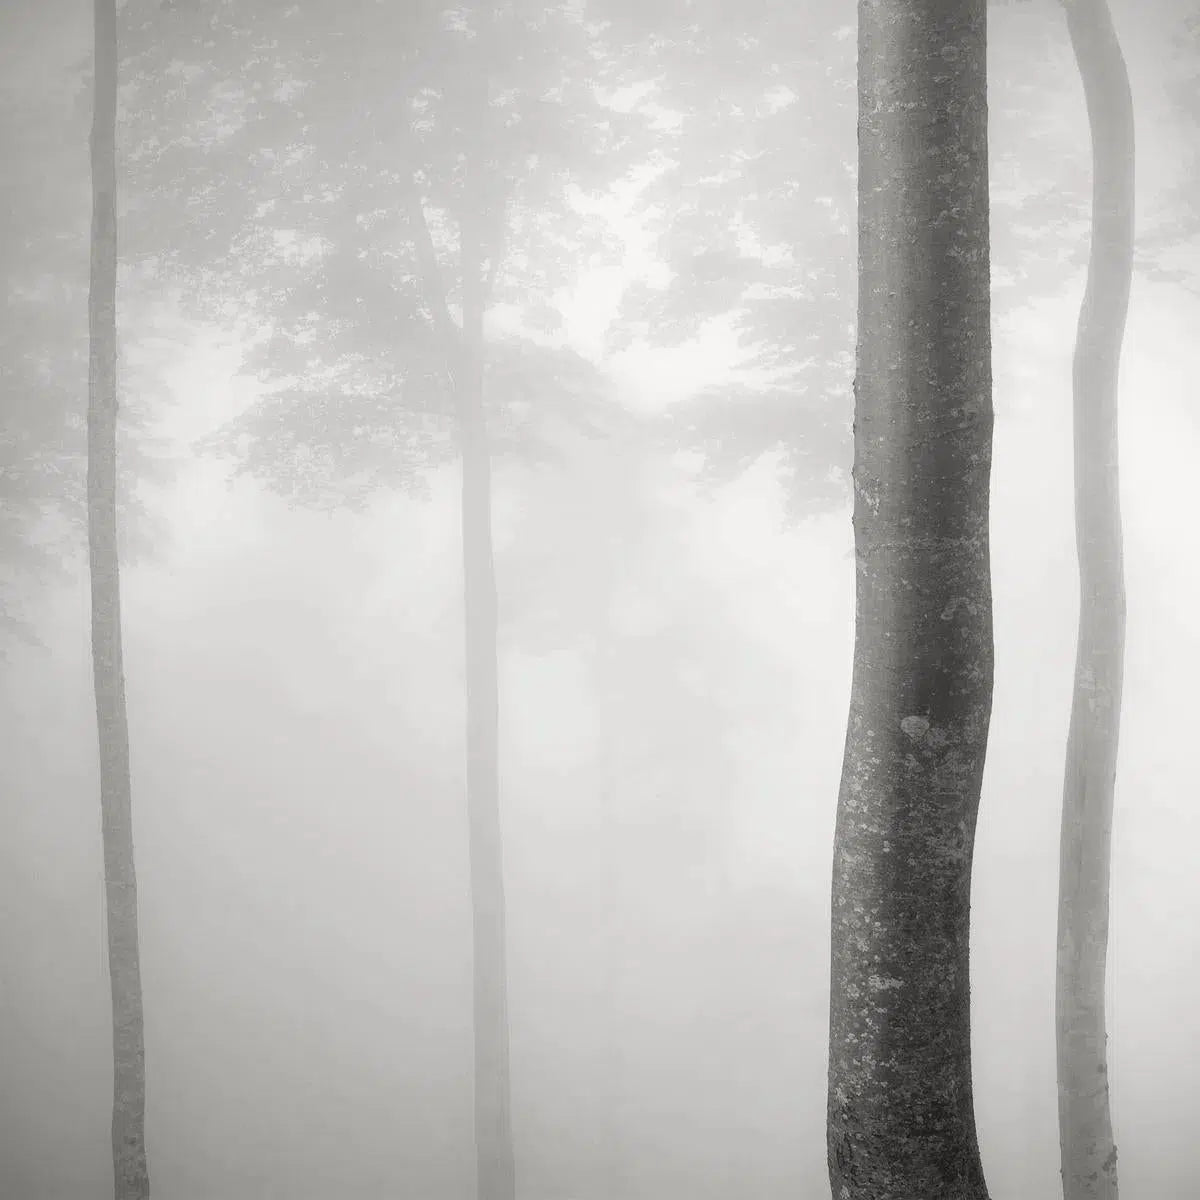 Beeches in Mist, France, by Jonathan Chritchley-PurePhoto